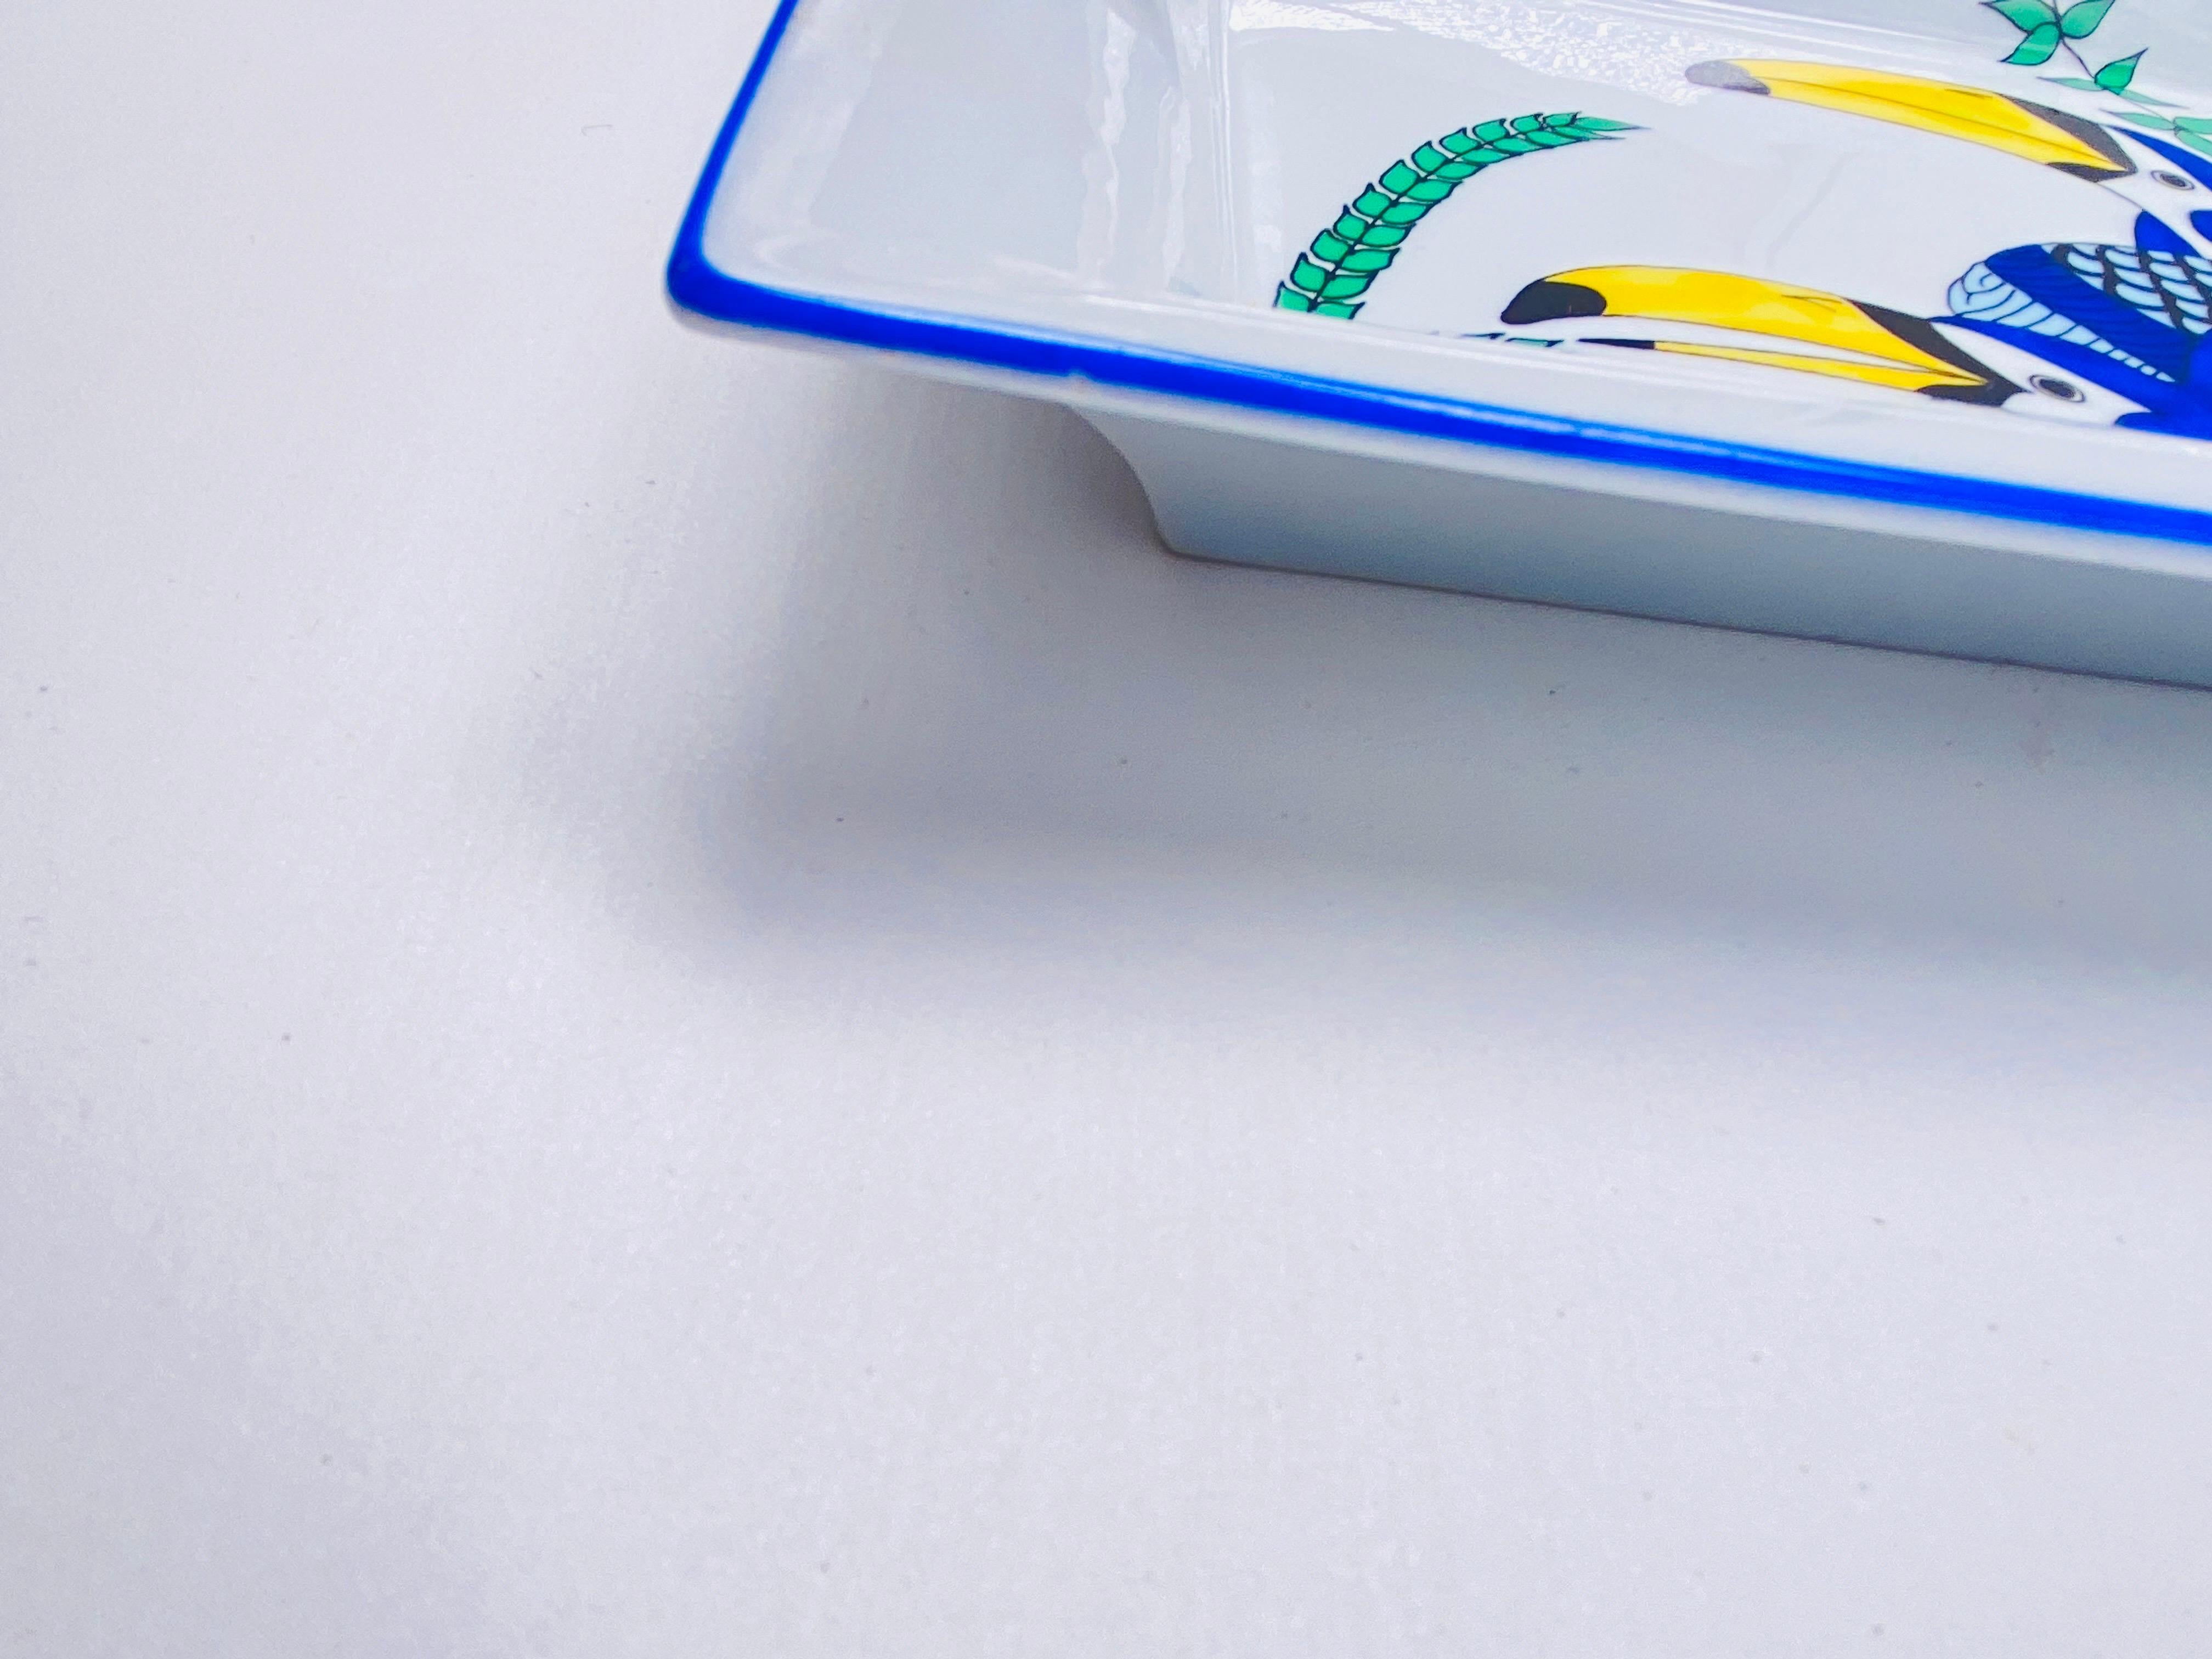 These handsome hand-painted Limoges porcelain ashtray is in a vibrant blue and yellow color with gilded accents and abirdr design. This piece is by Deshoulières Limoges, made for a company named Somangest, and signed by artist Sophie d'E.
It is a